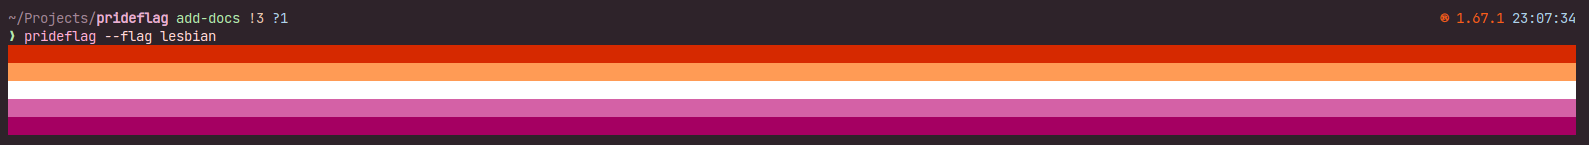 Output of the program, run with --flag lesbian